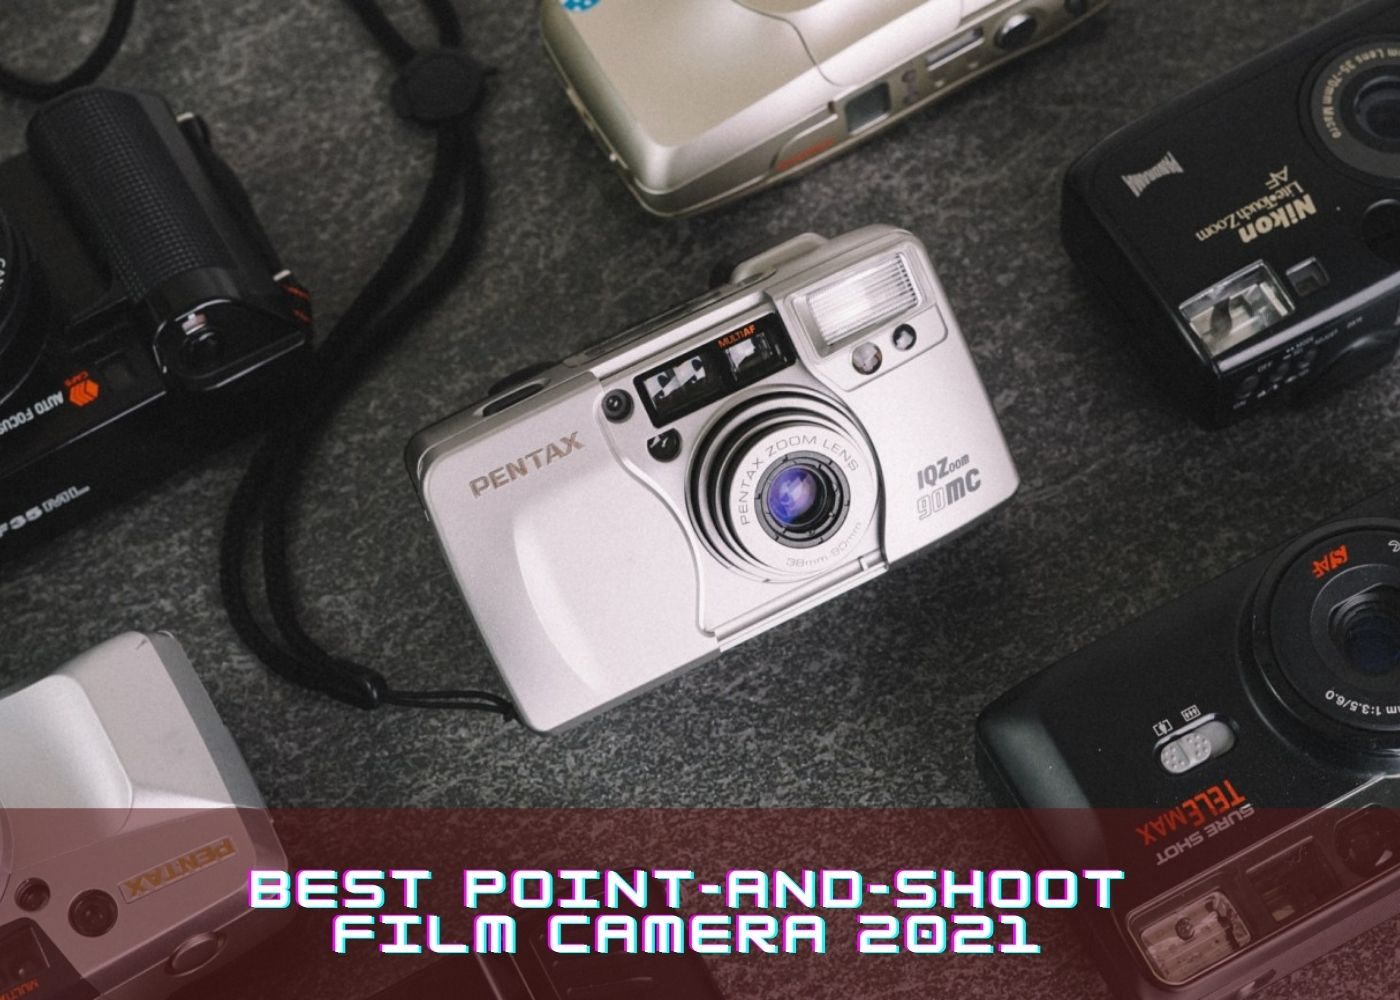 Best point-and-shoot film camera 2021 